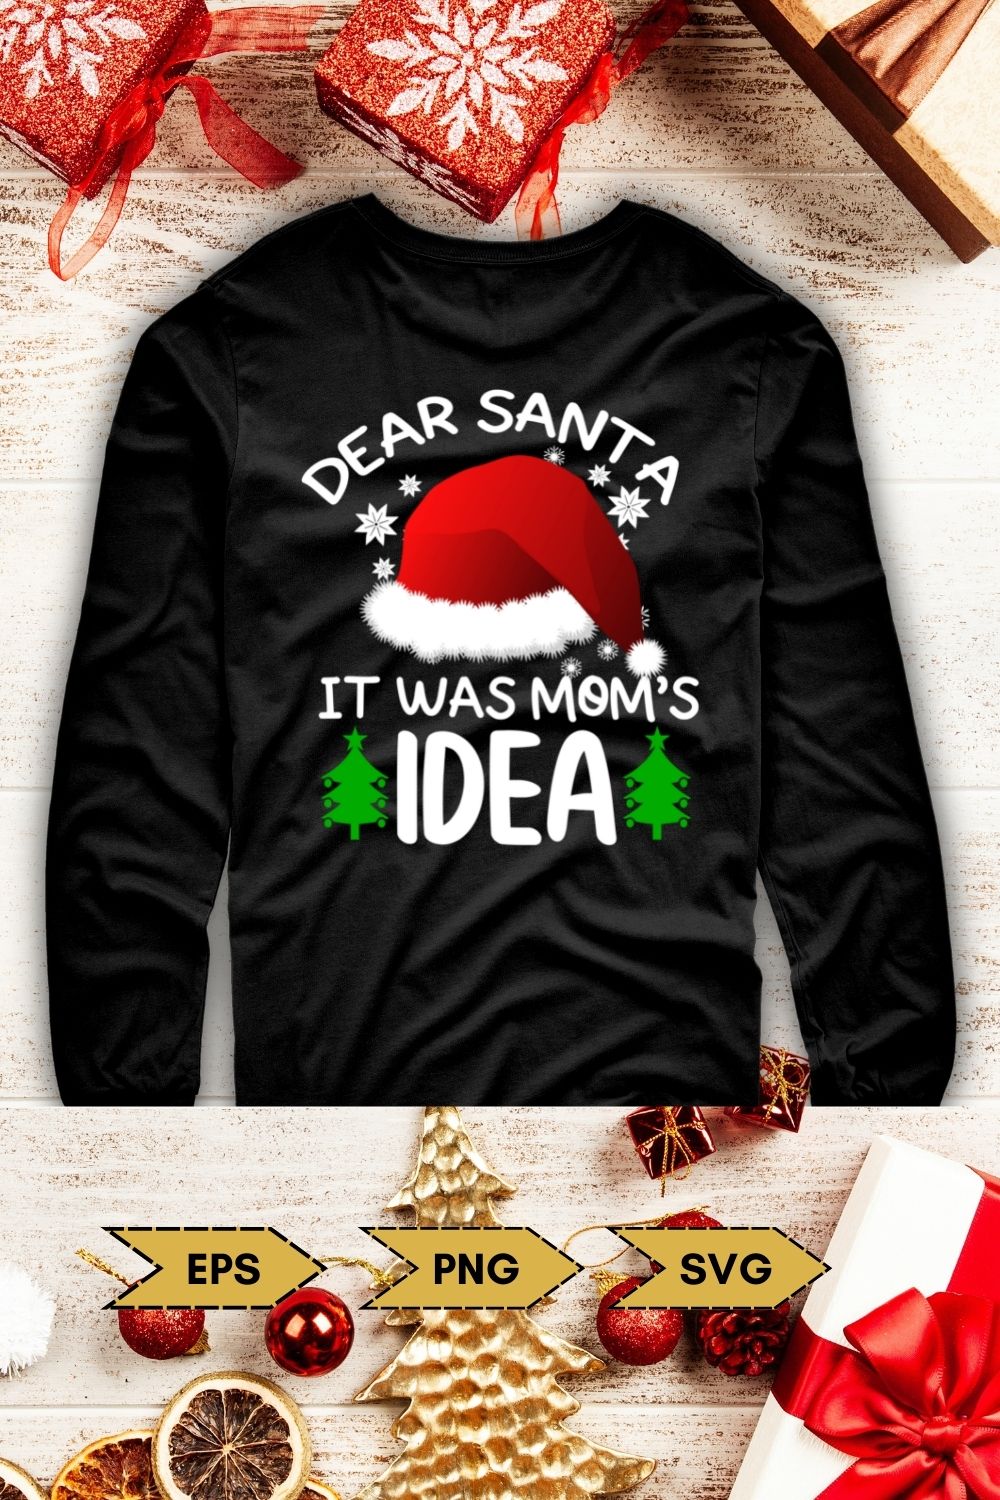 Picture of a black sweatshirt with an adorable Christmas print.